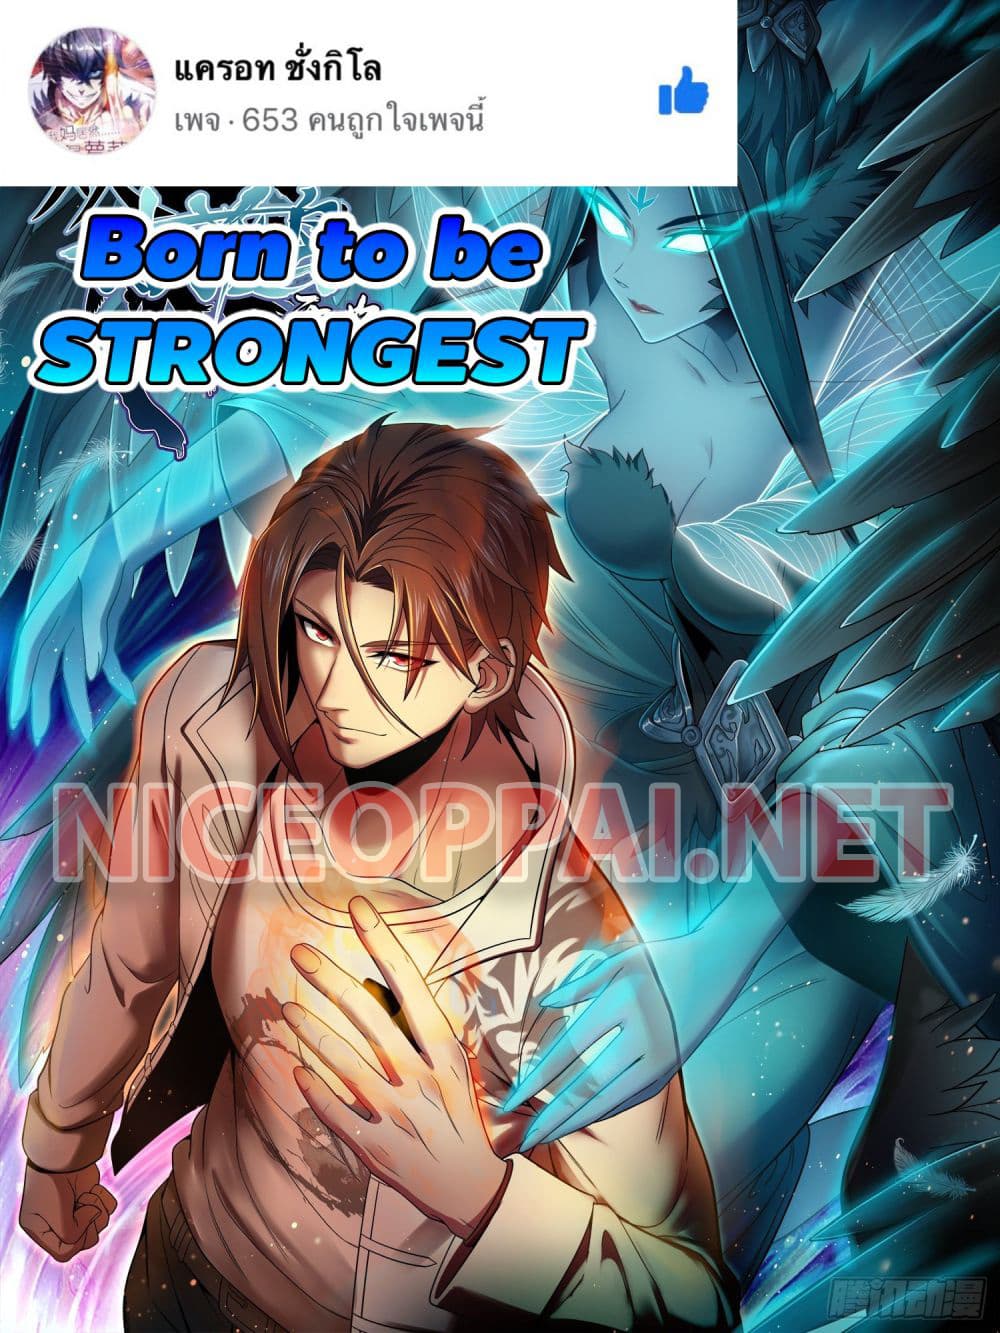 Born to be Strongest15 (1)